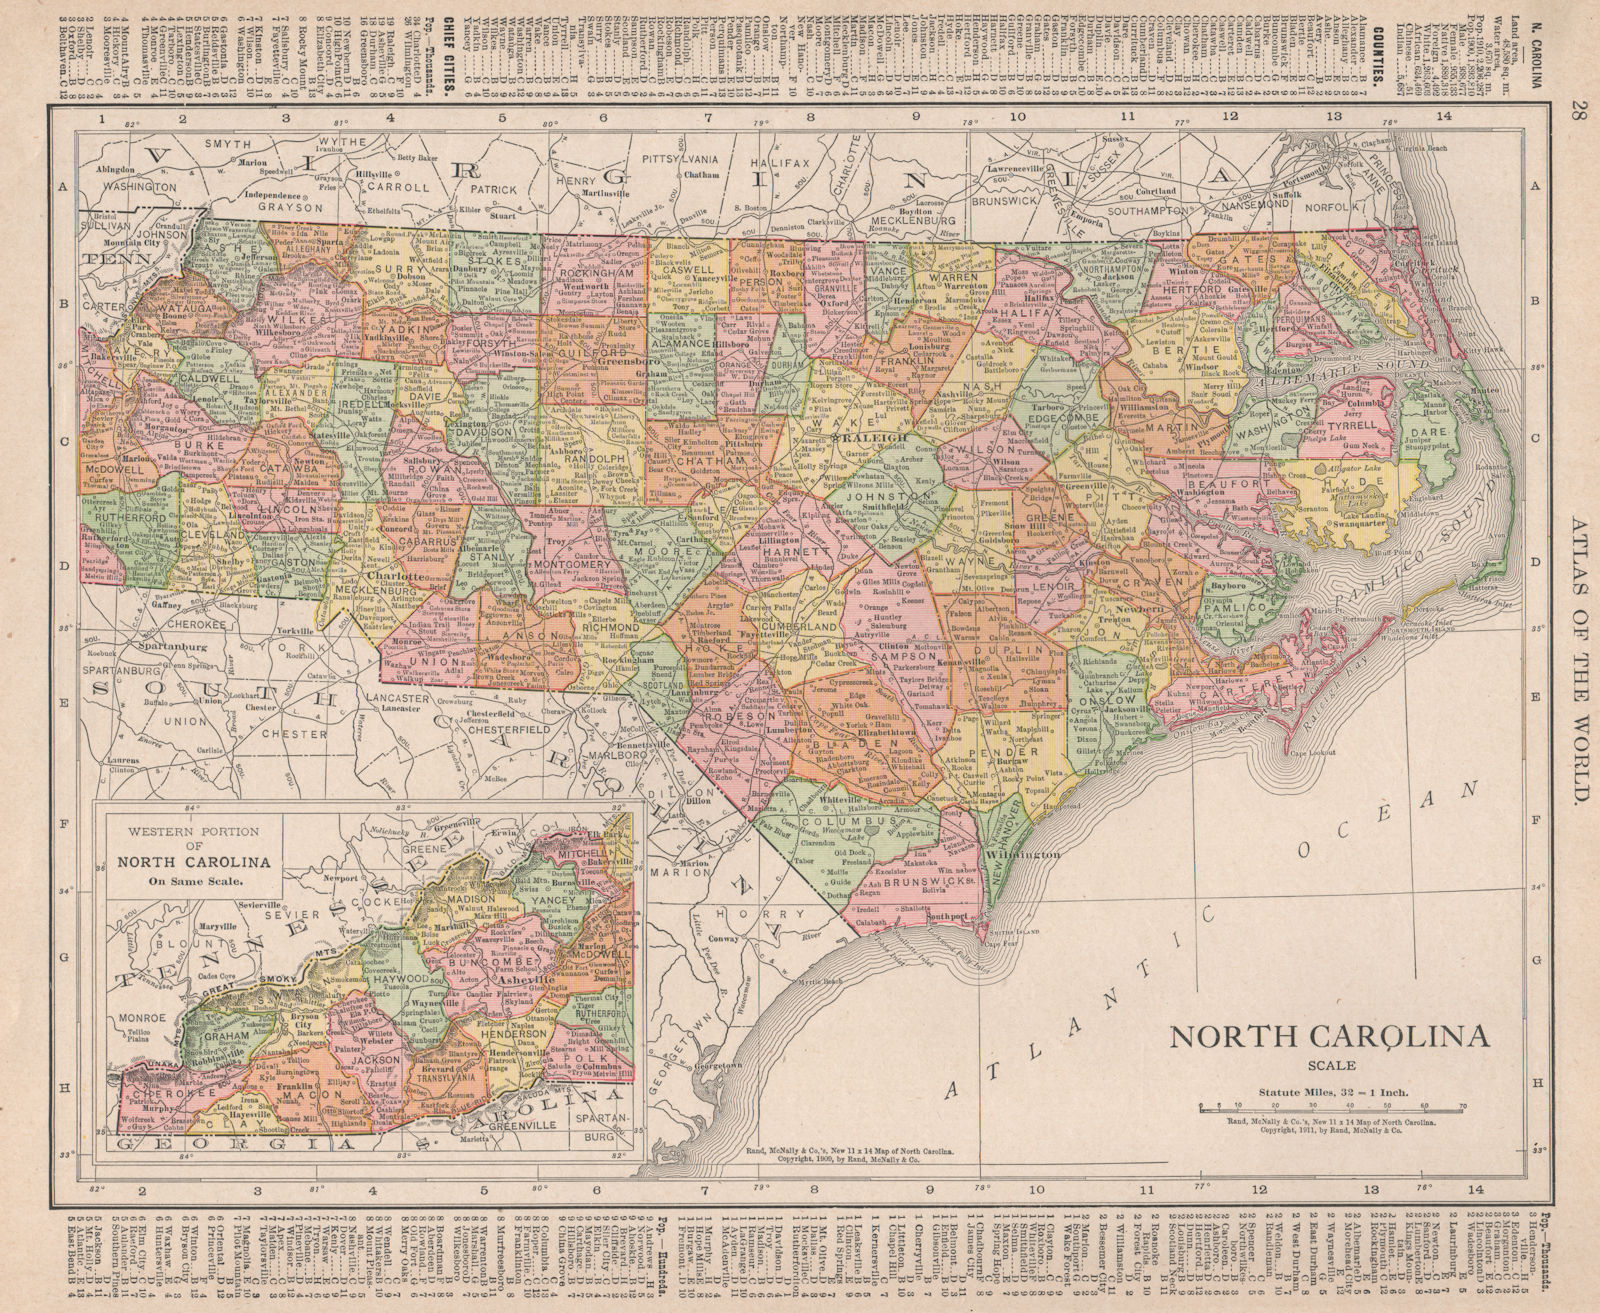 North Carolina state map showing counties. RAND MCNALLY 1912 old antique